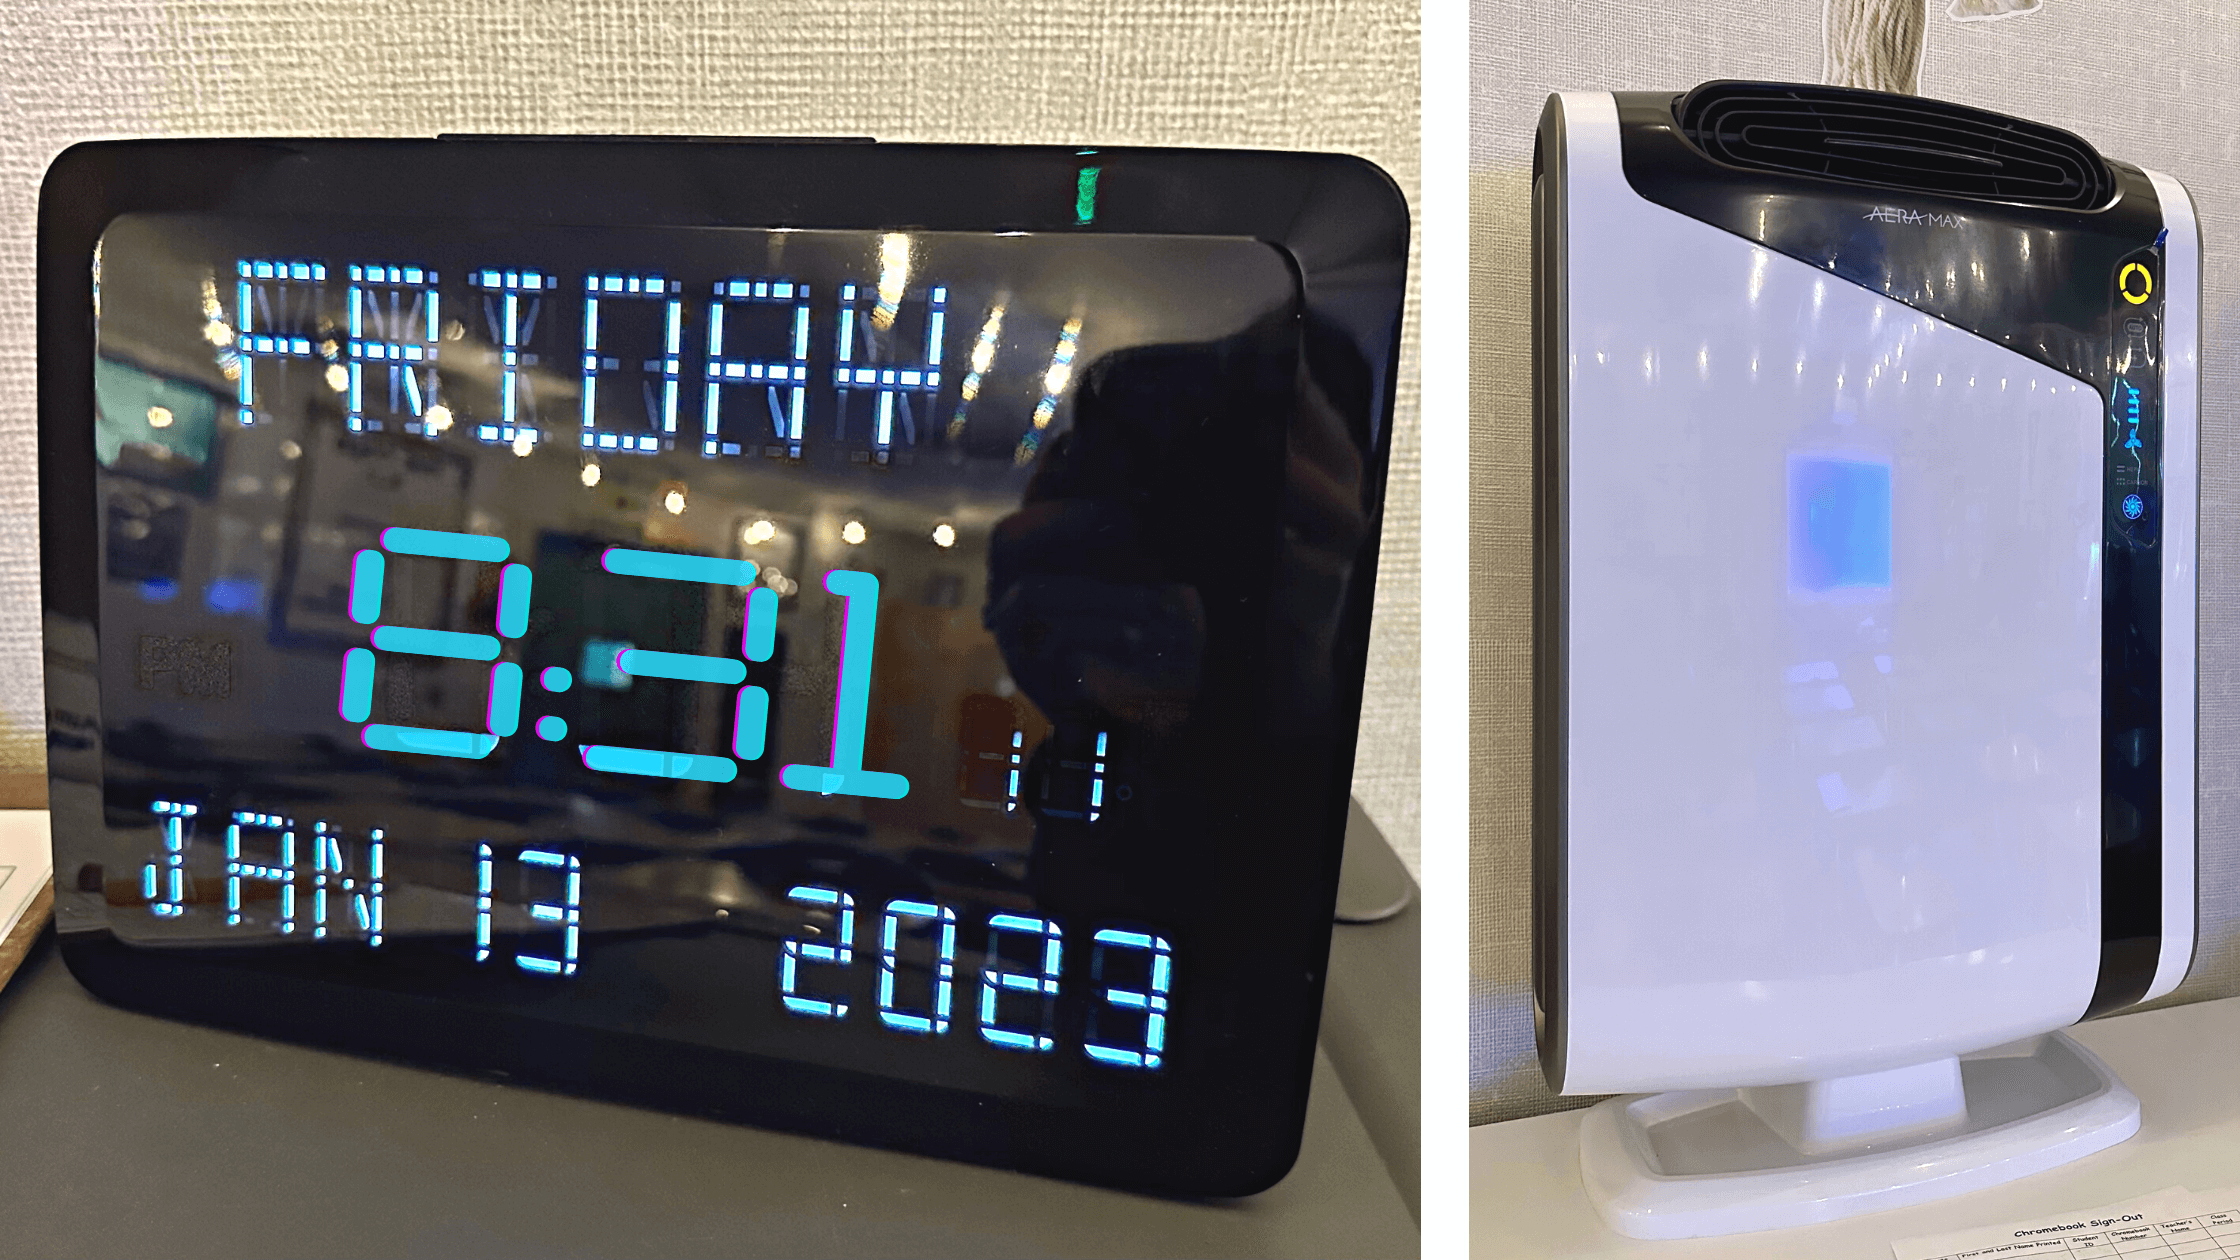 Image of an Air Purifier and a Digital Clock